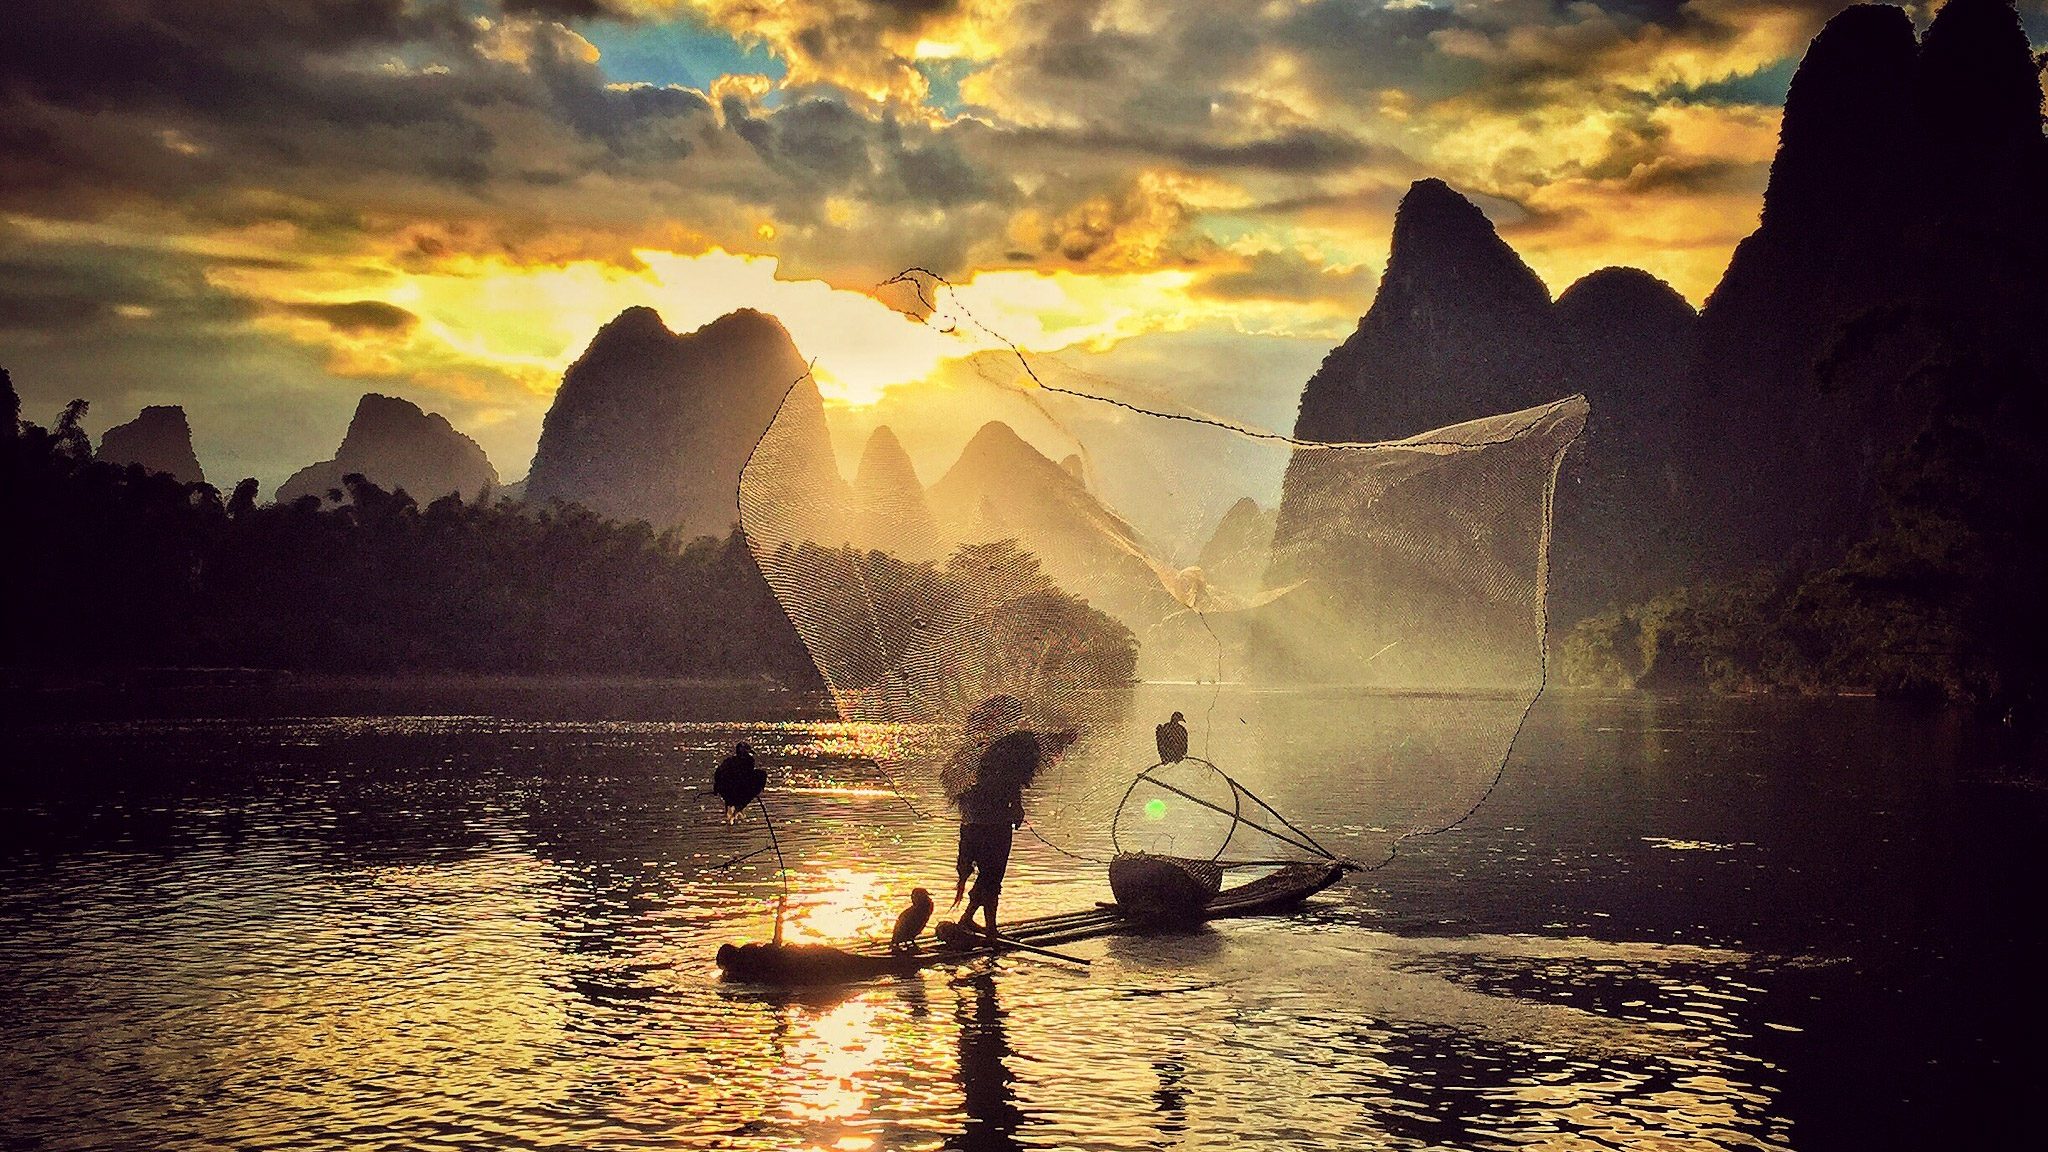 All these amazing photos were taken with smartphones